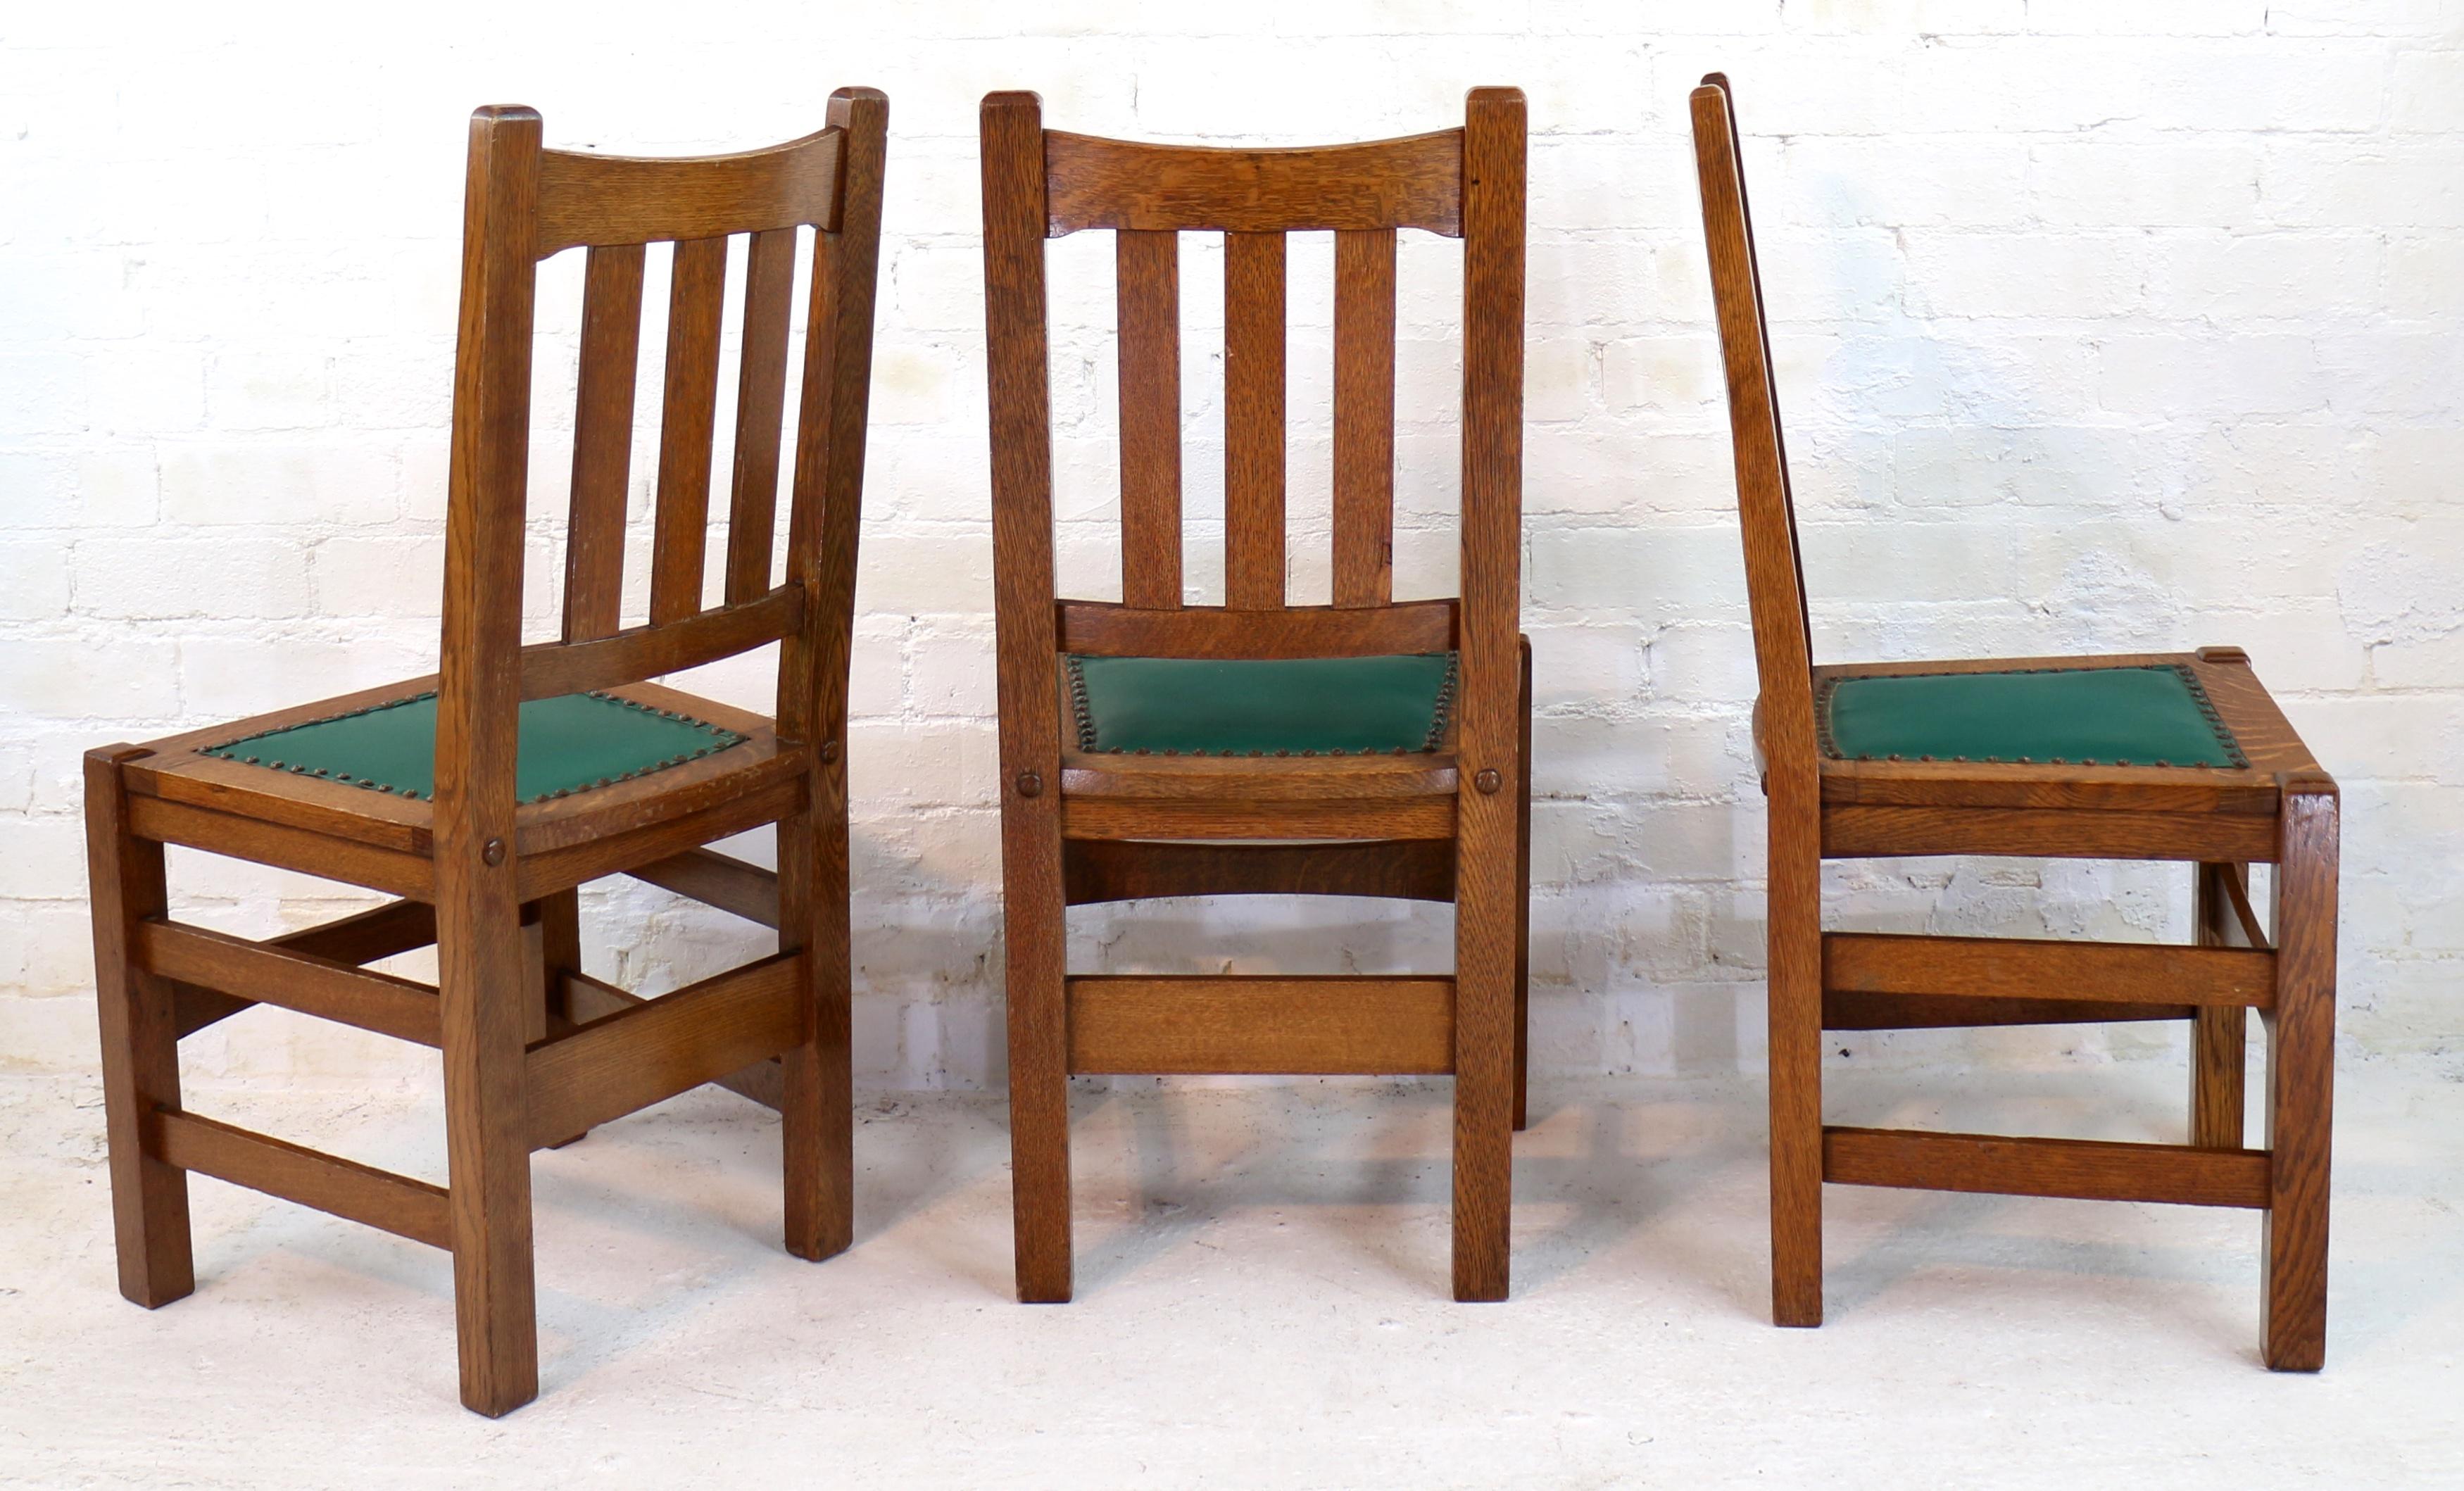 Upholstery Set of 8 American Stickley Arts & Crafts Mission Oak Dining Chairs, circa 1900